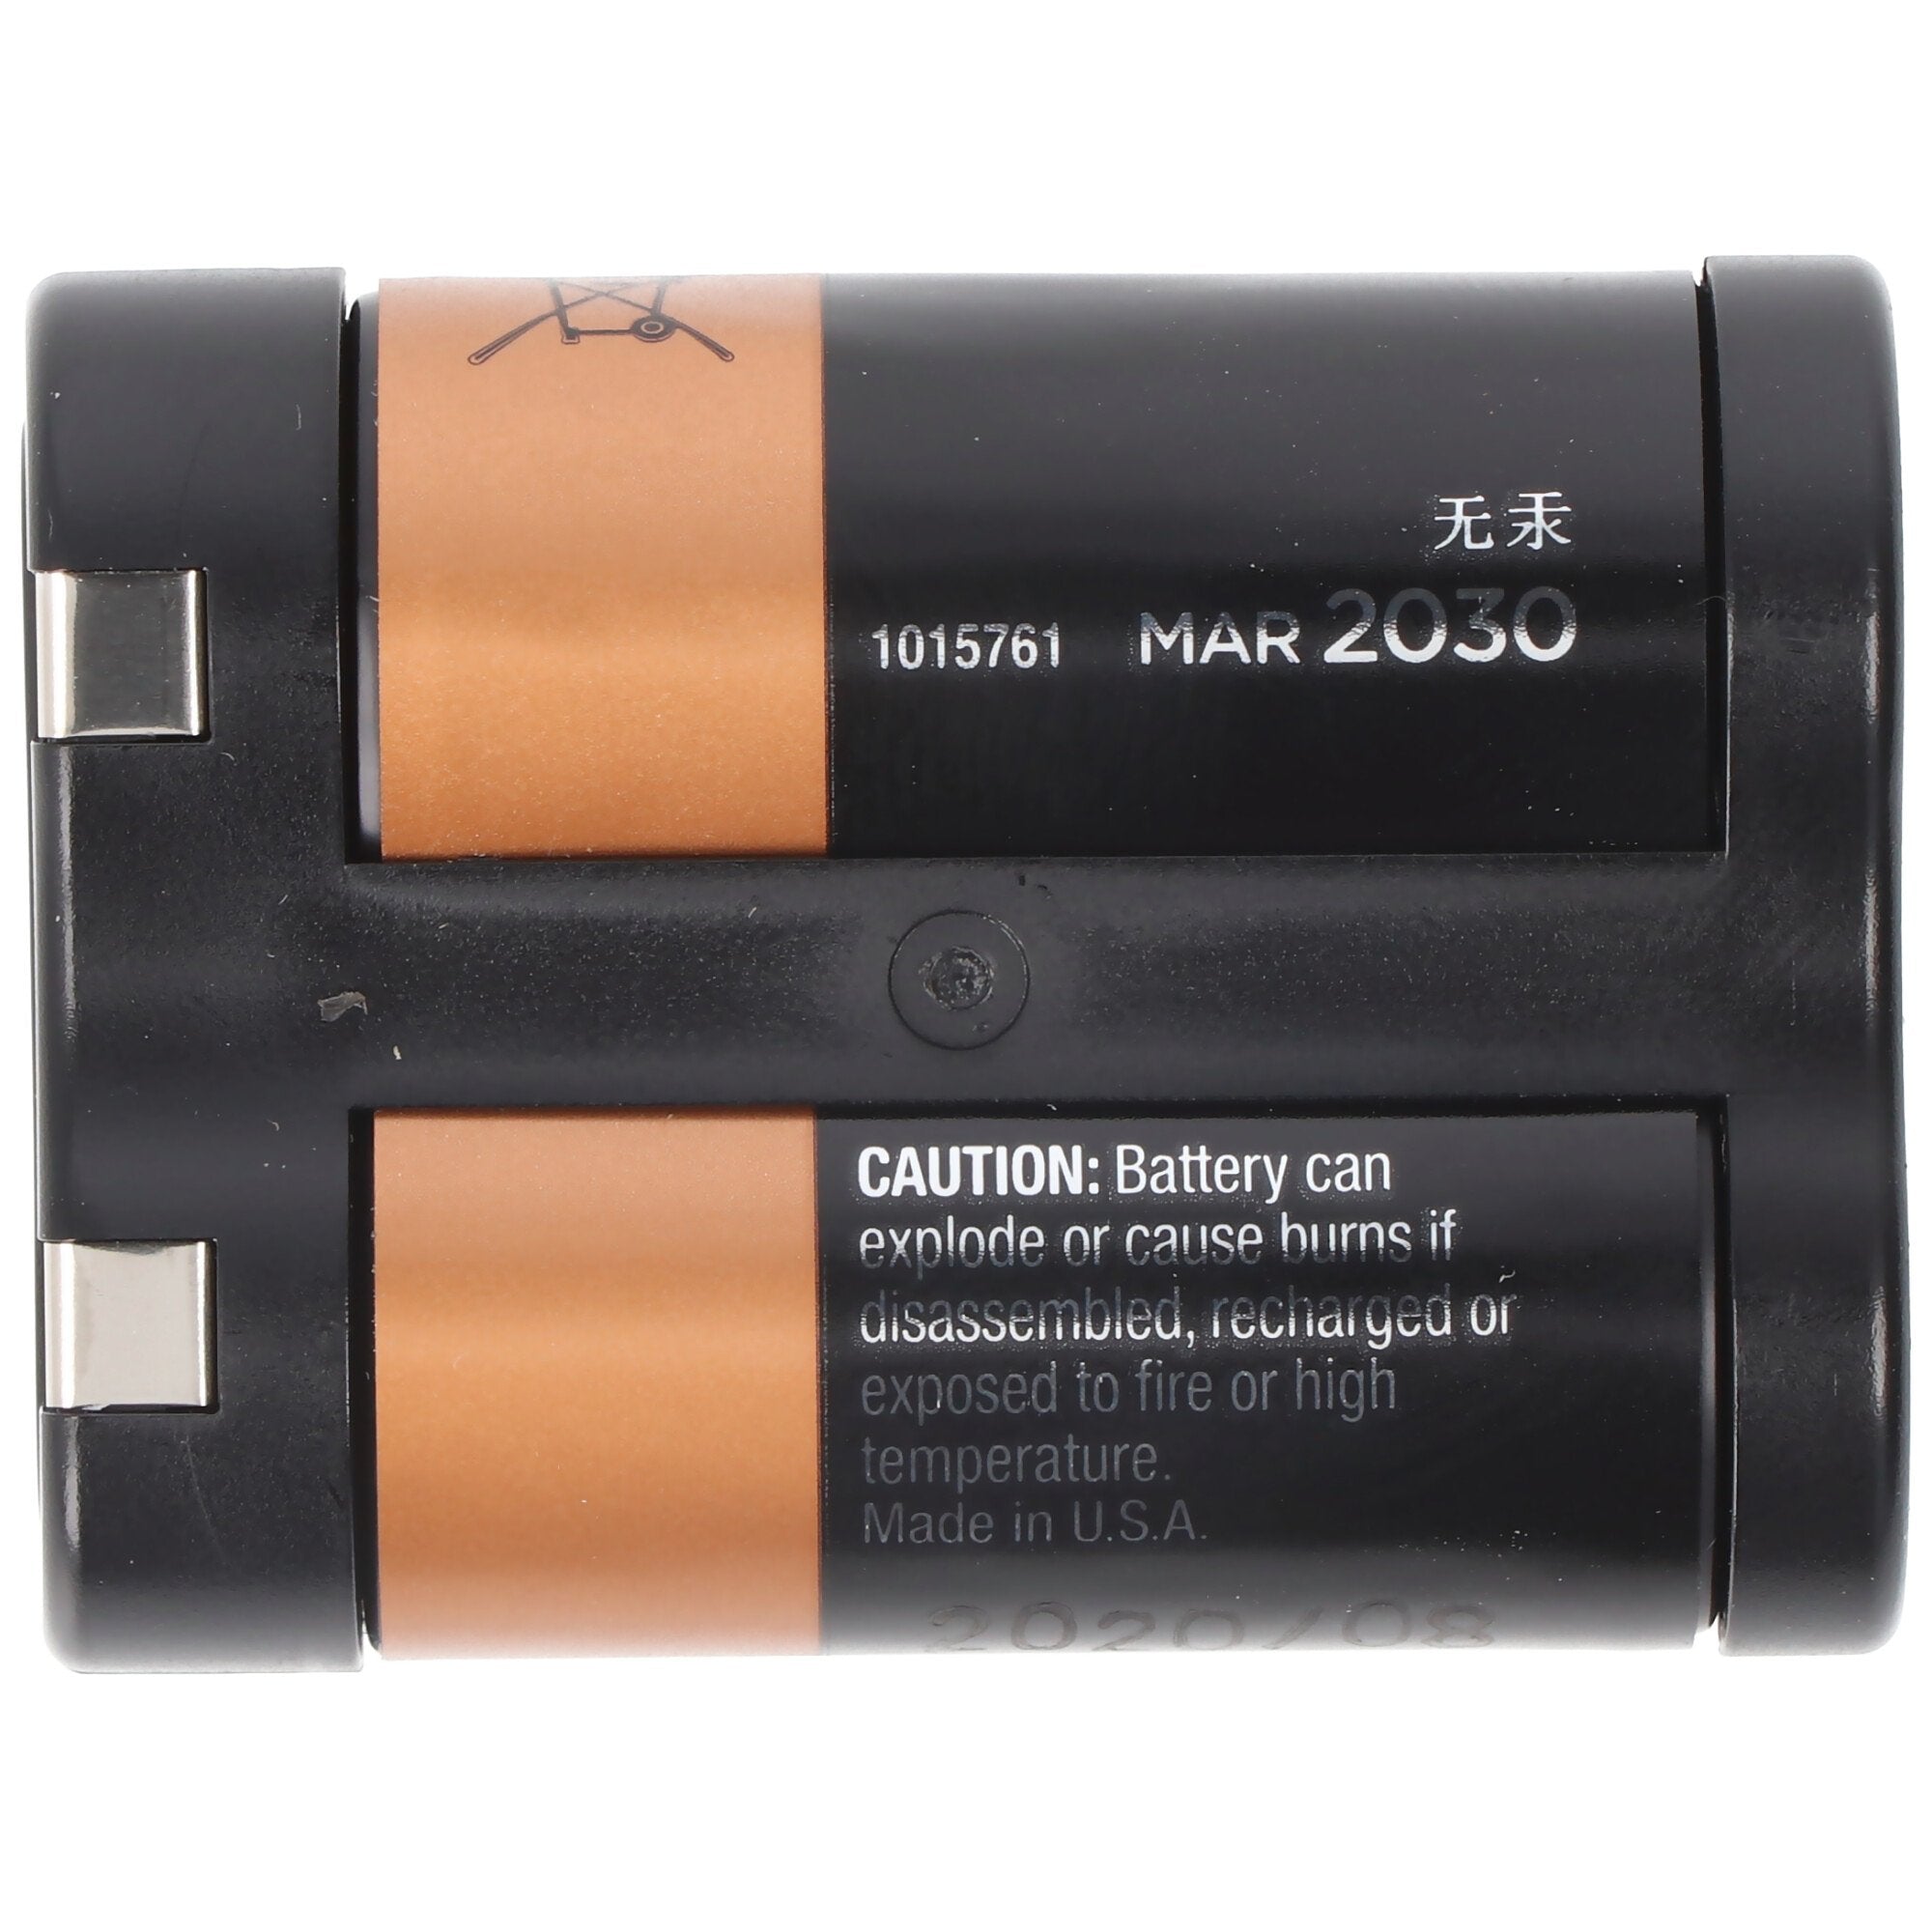 Duracell photo battery 2CR5 Ultra Lithium 6 volt with 1400mAh single blister